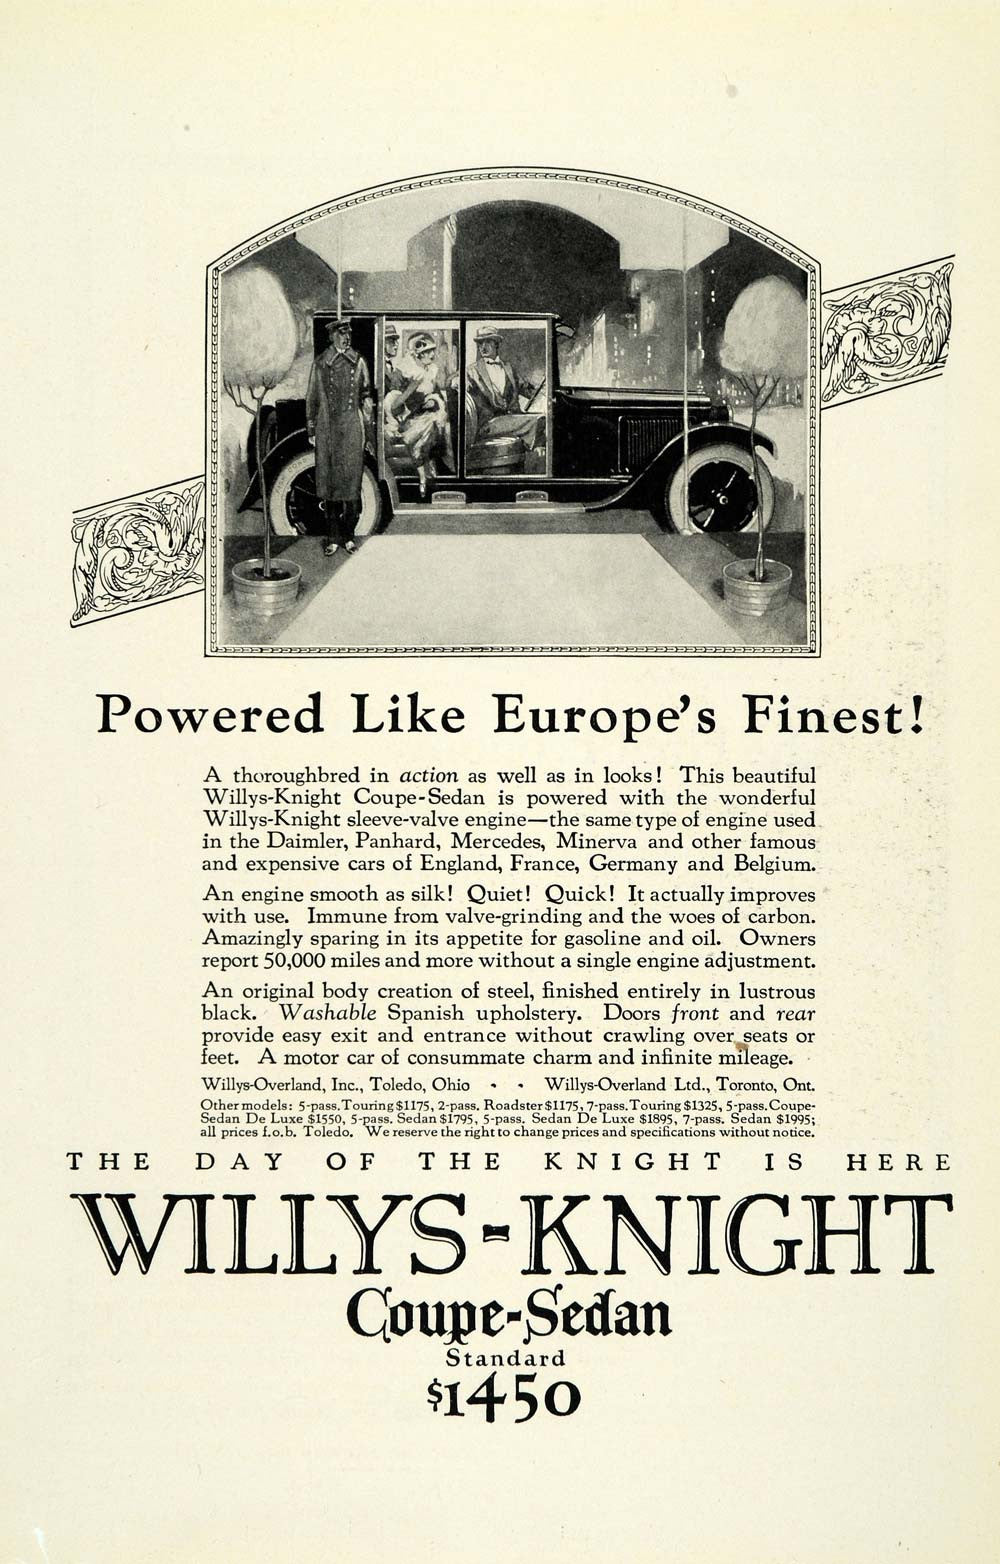 1924 Ad Antique Willys Knight Coupe Sedan Overland Automobile Car Pricing NGM2 - Period Paper
